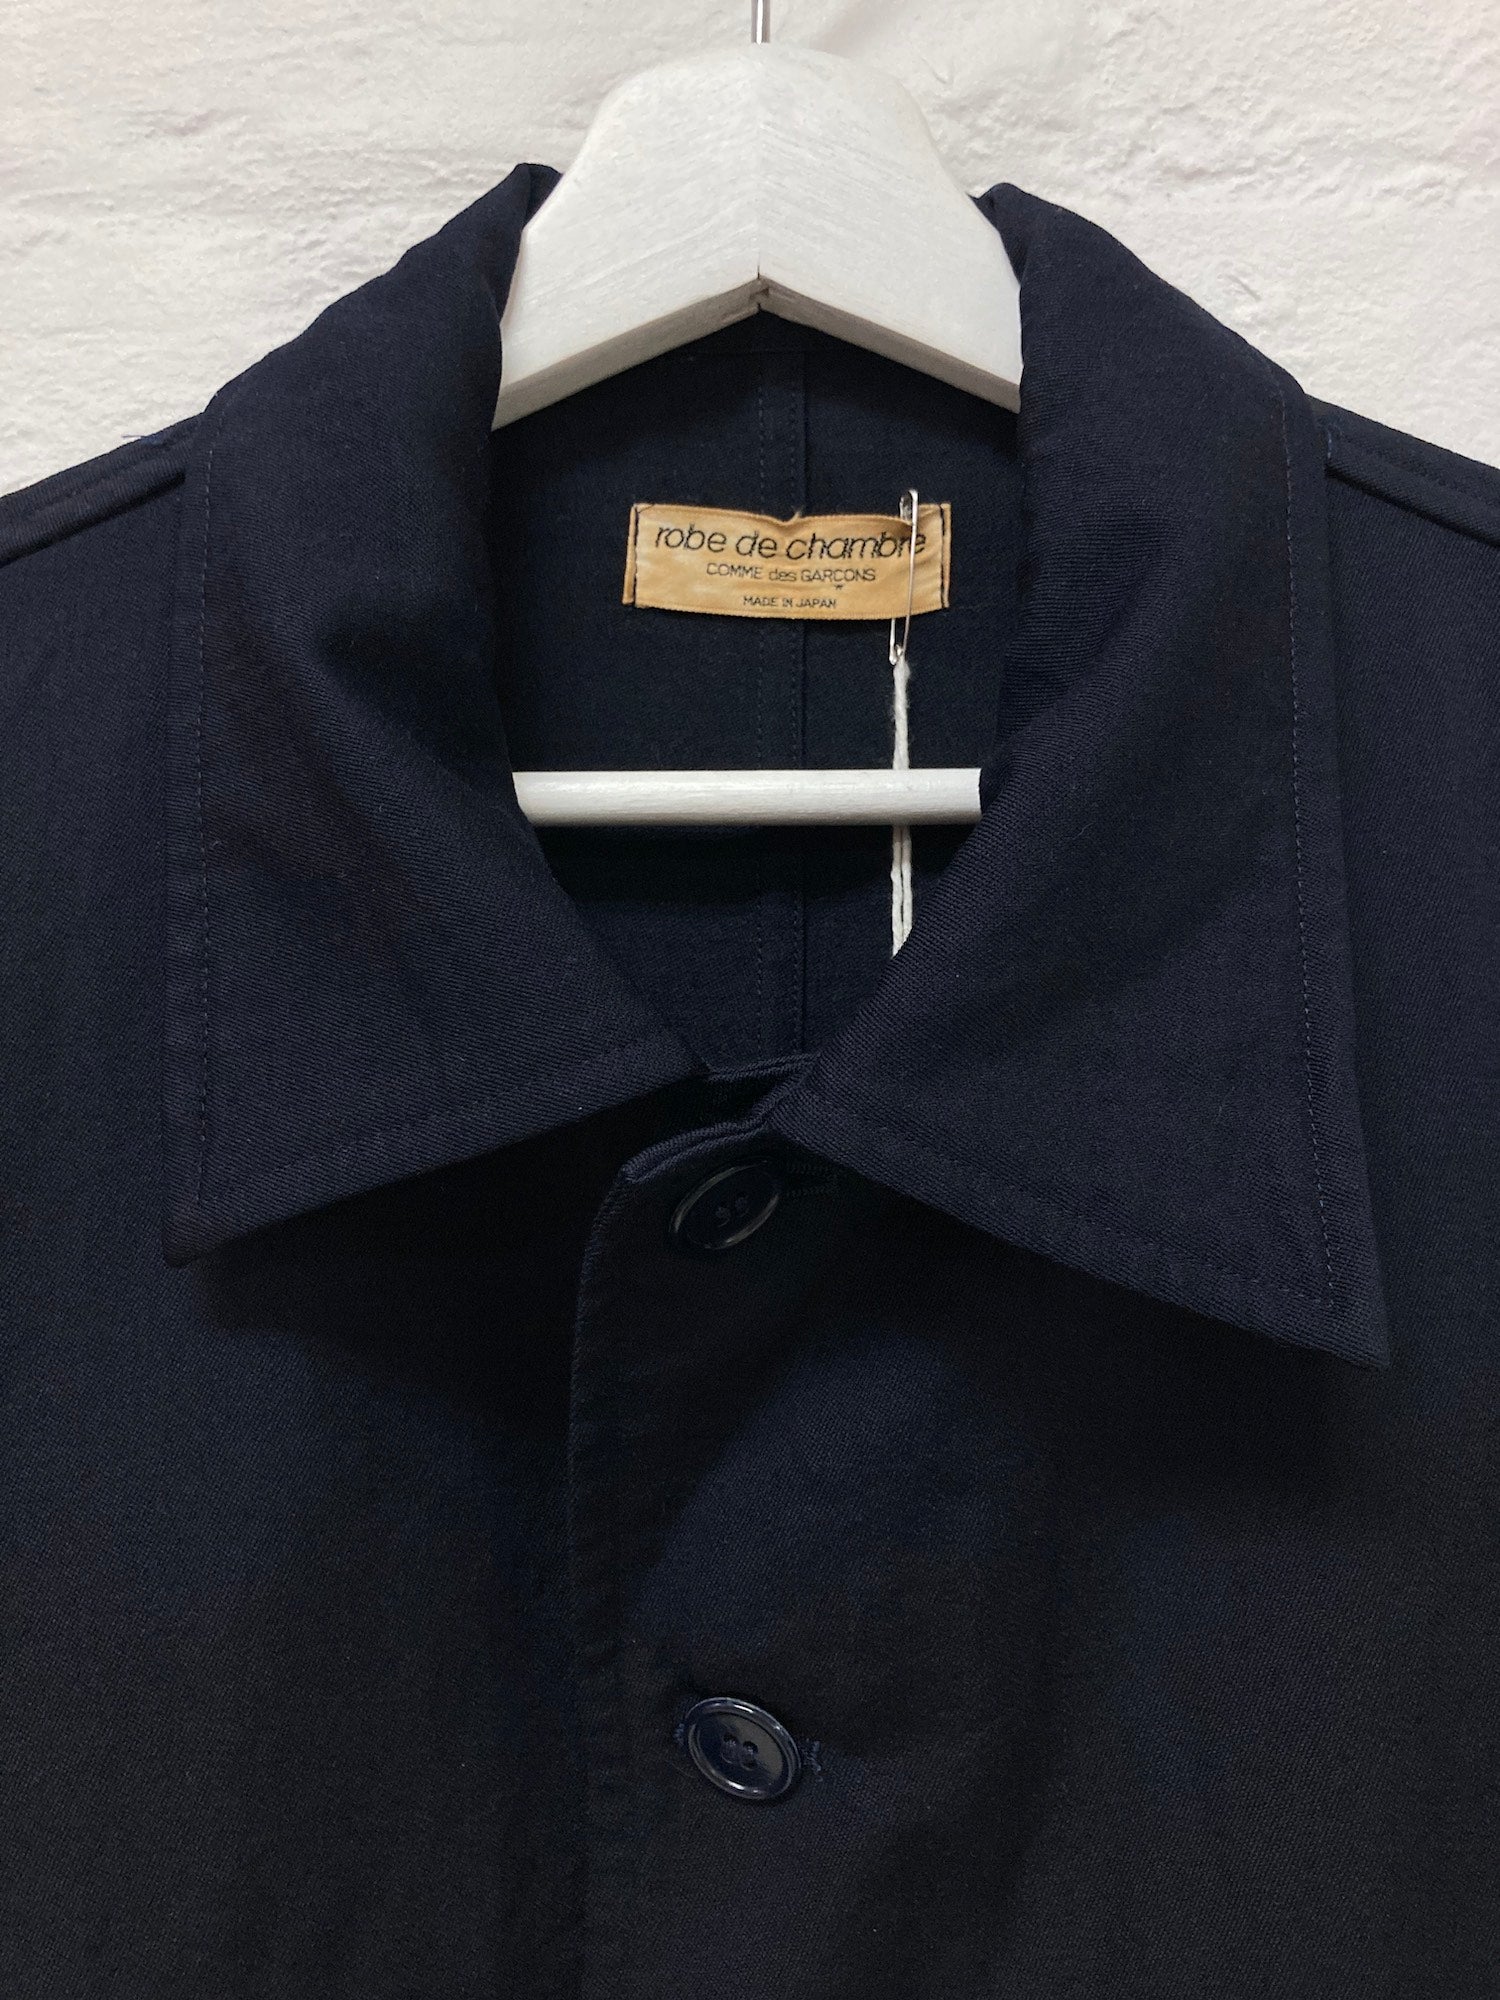 Robe de Chambre Comme des Garcons 1980s dark navy wool cropped jacket